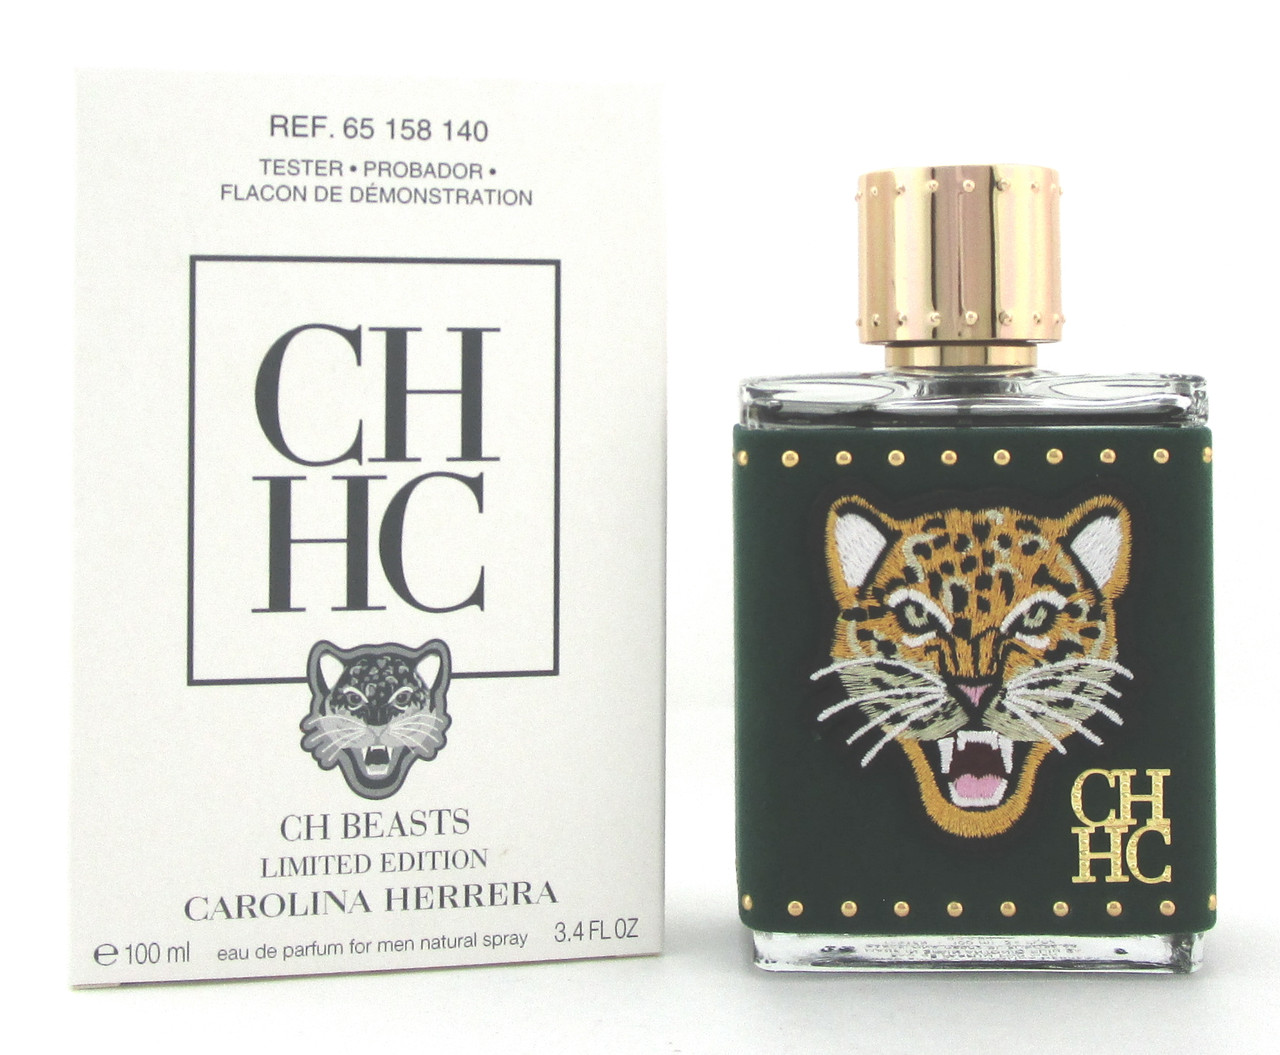 Carolina Herrera - Take a walk on the wild side with CH Beasts, the new CH  Men limited edition fragrance. This unforgettable scent exudes strength and  masculinity, just like the fierce felines